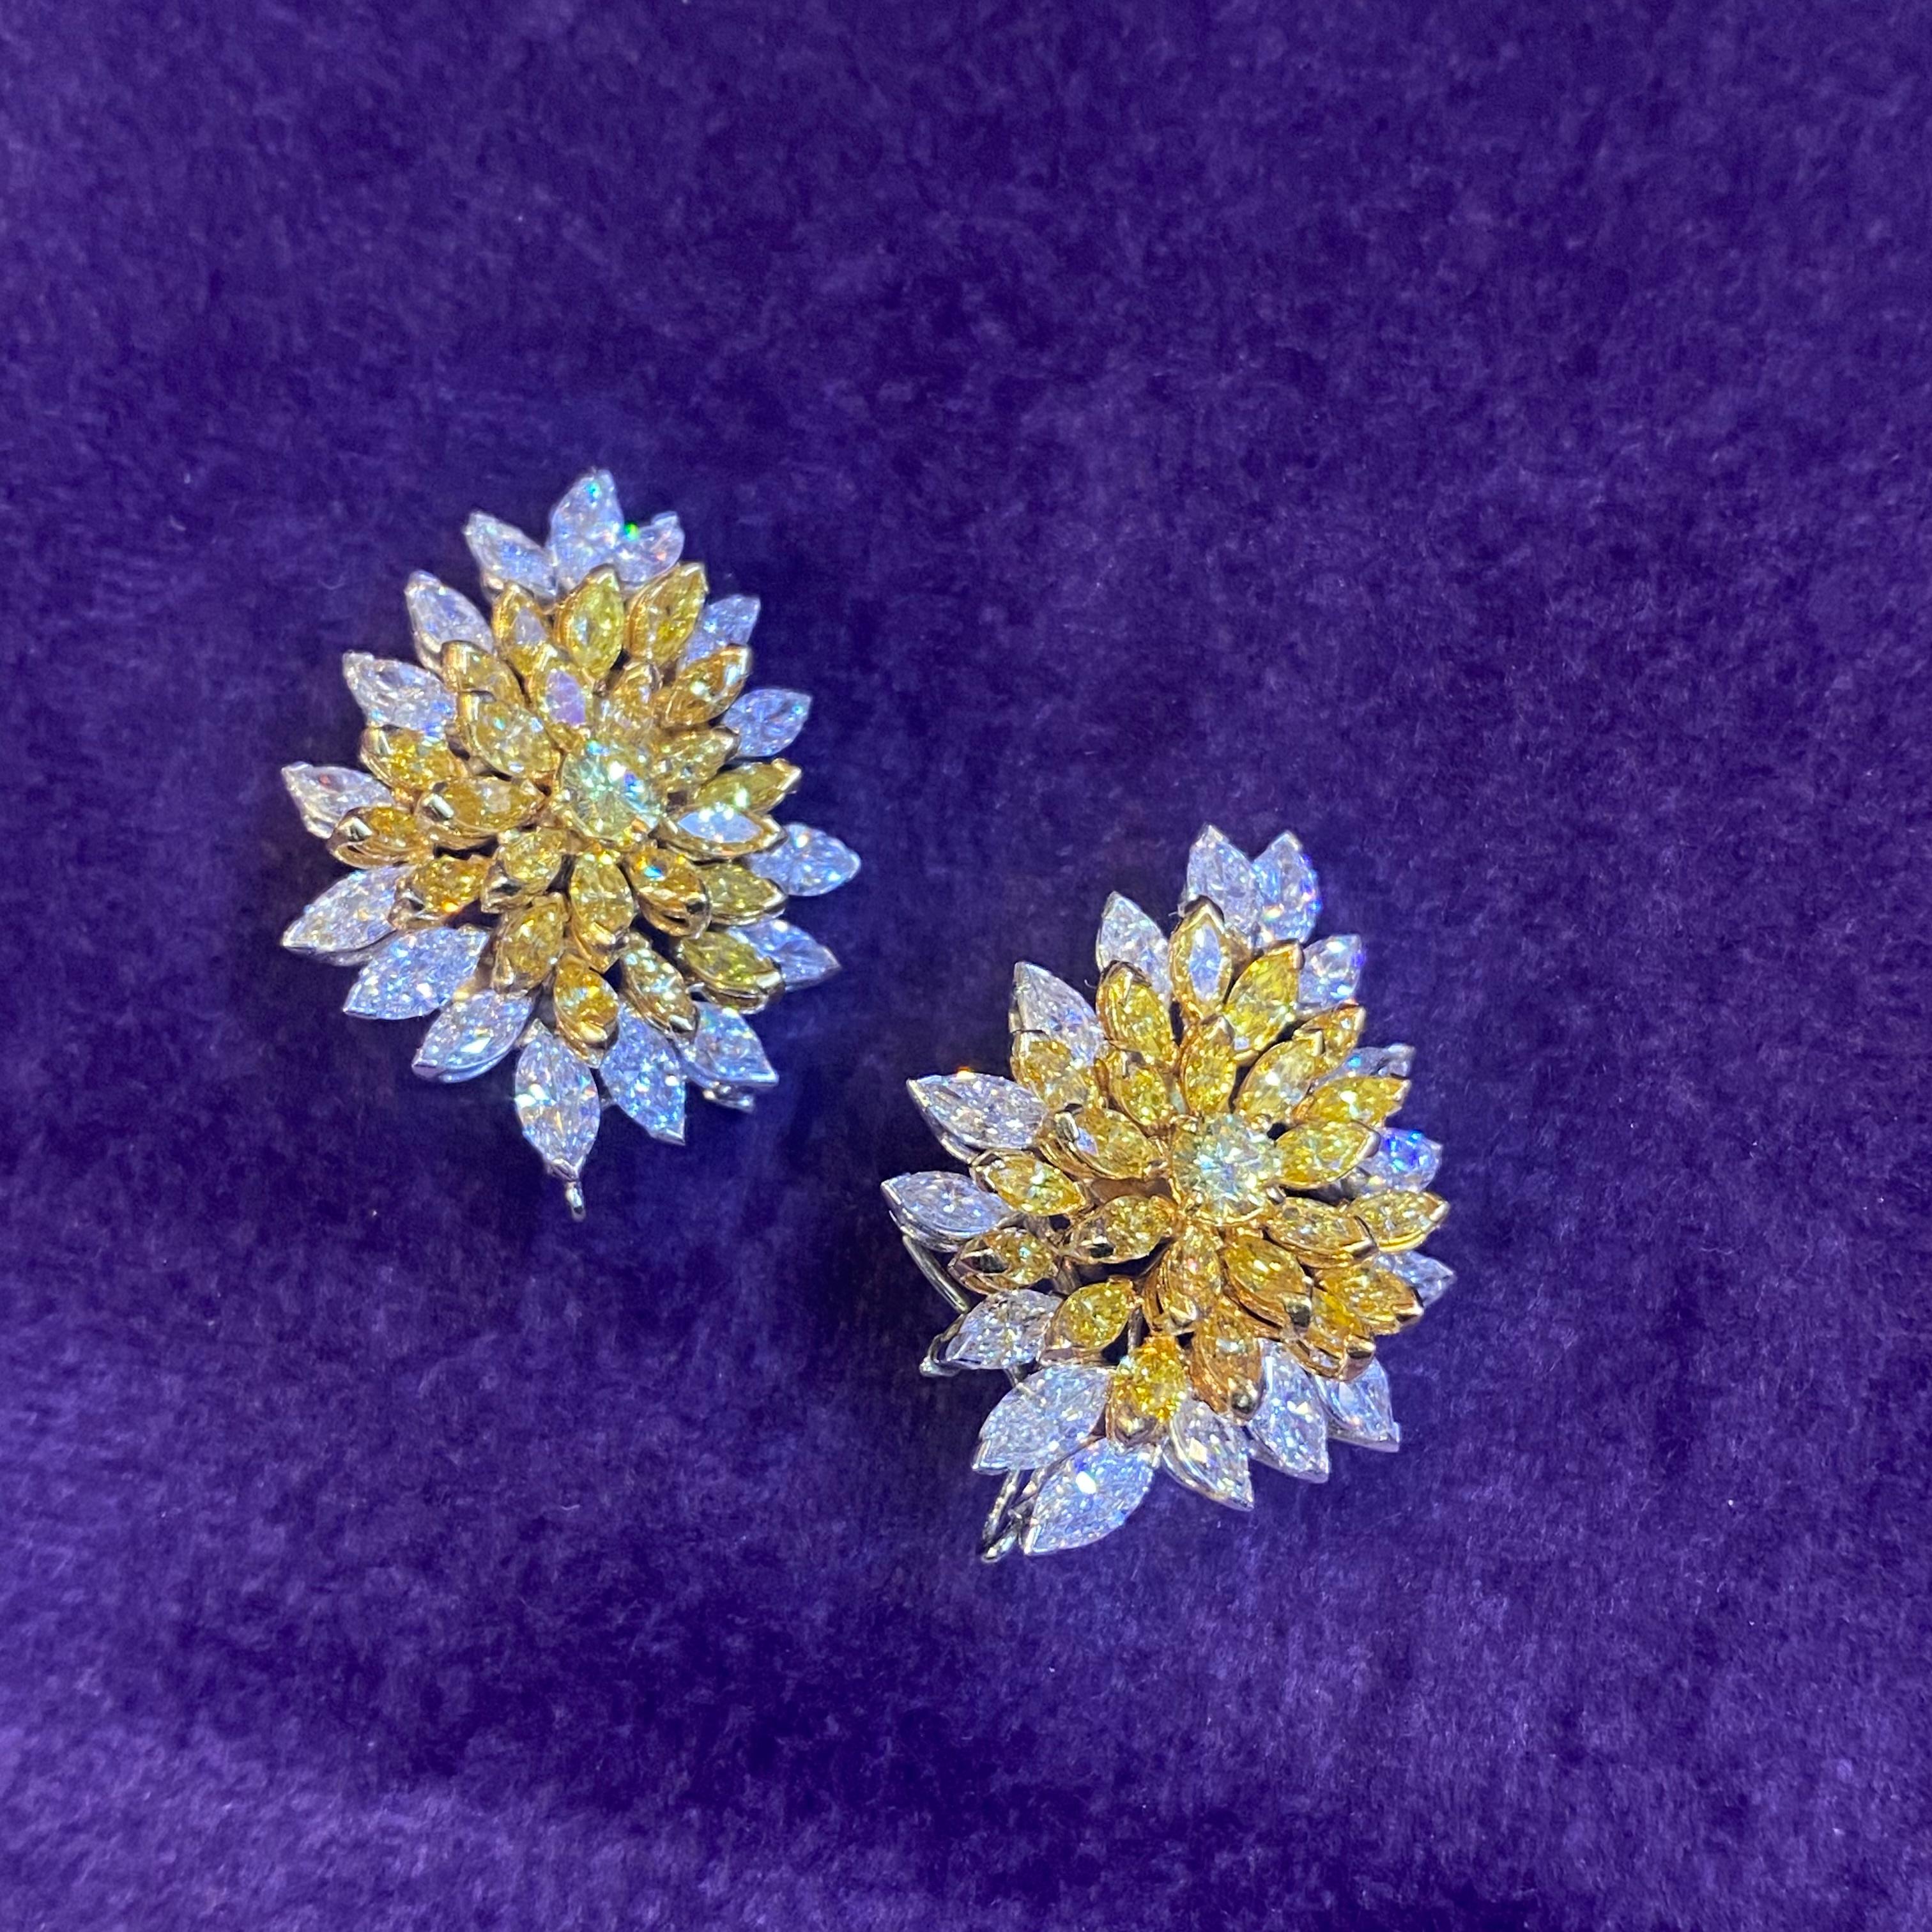 Van Cleef & Arpels Multicolor Diamond Earrings In Excellent Condition For Sale In New York, NY